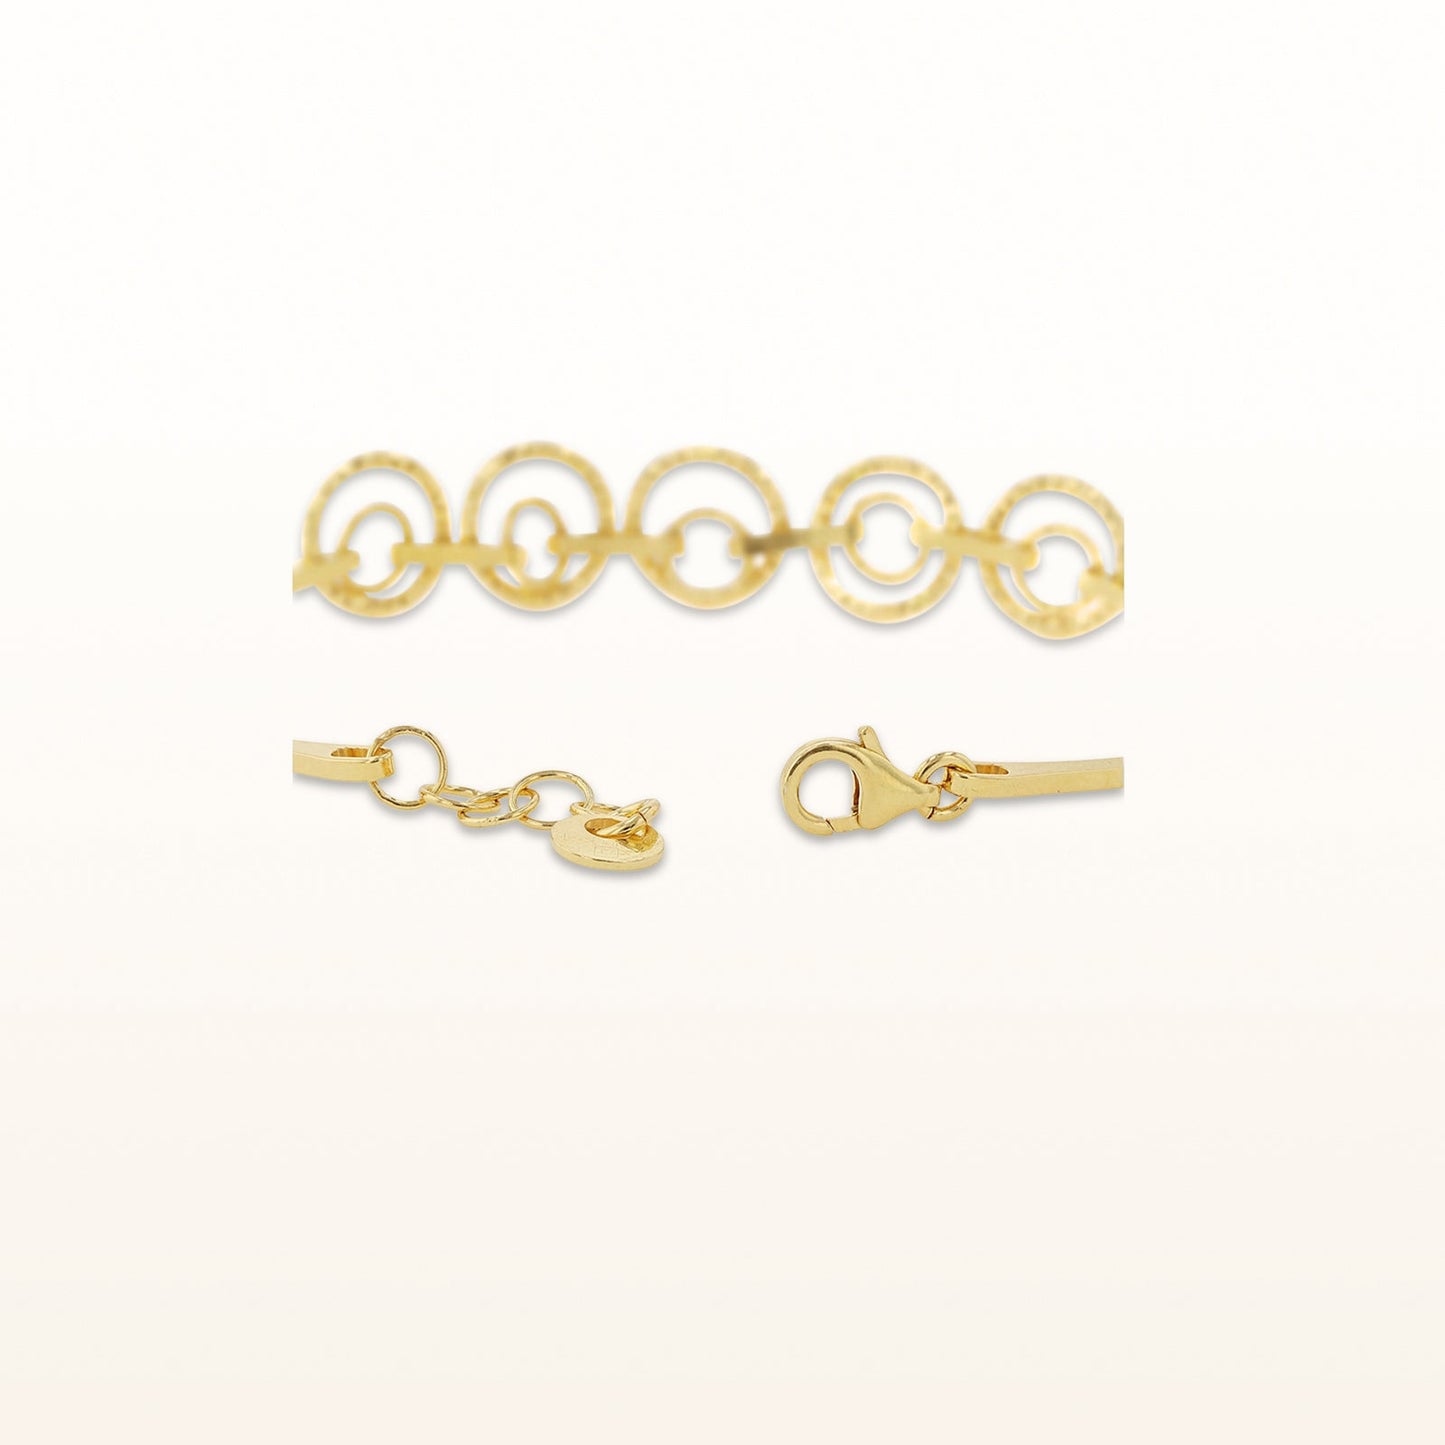 Double Circle Bracelet in Yellow Gold Plated Sterling Silver